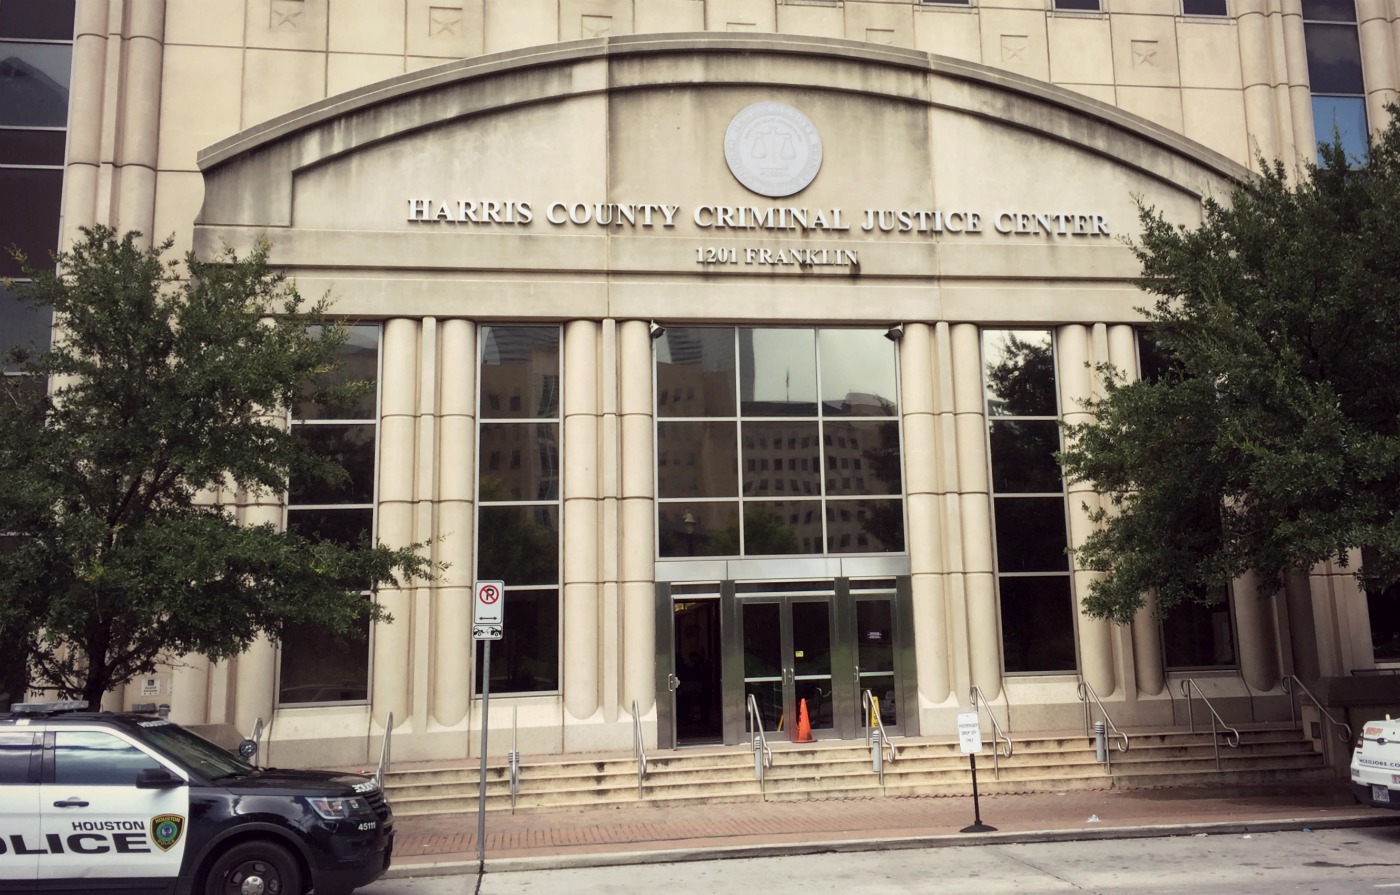 The Harris County Criminal Justice Center in downtown Houston. (Photo: Edel Howlin, Houston Public Media)